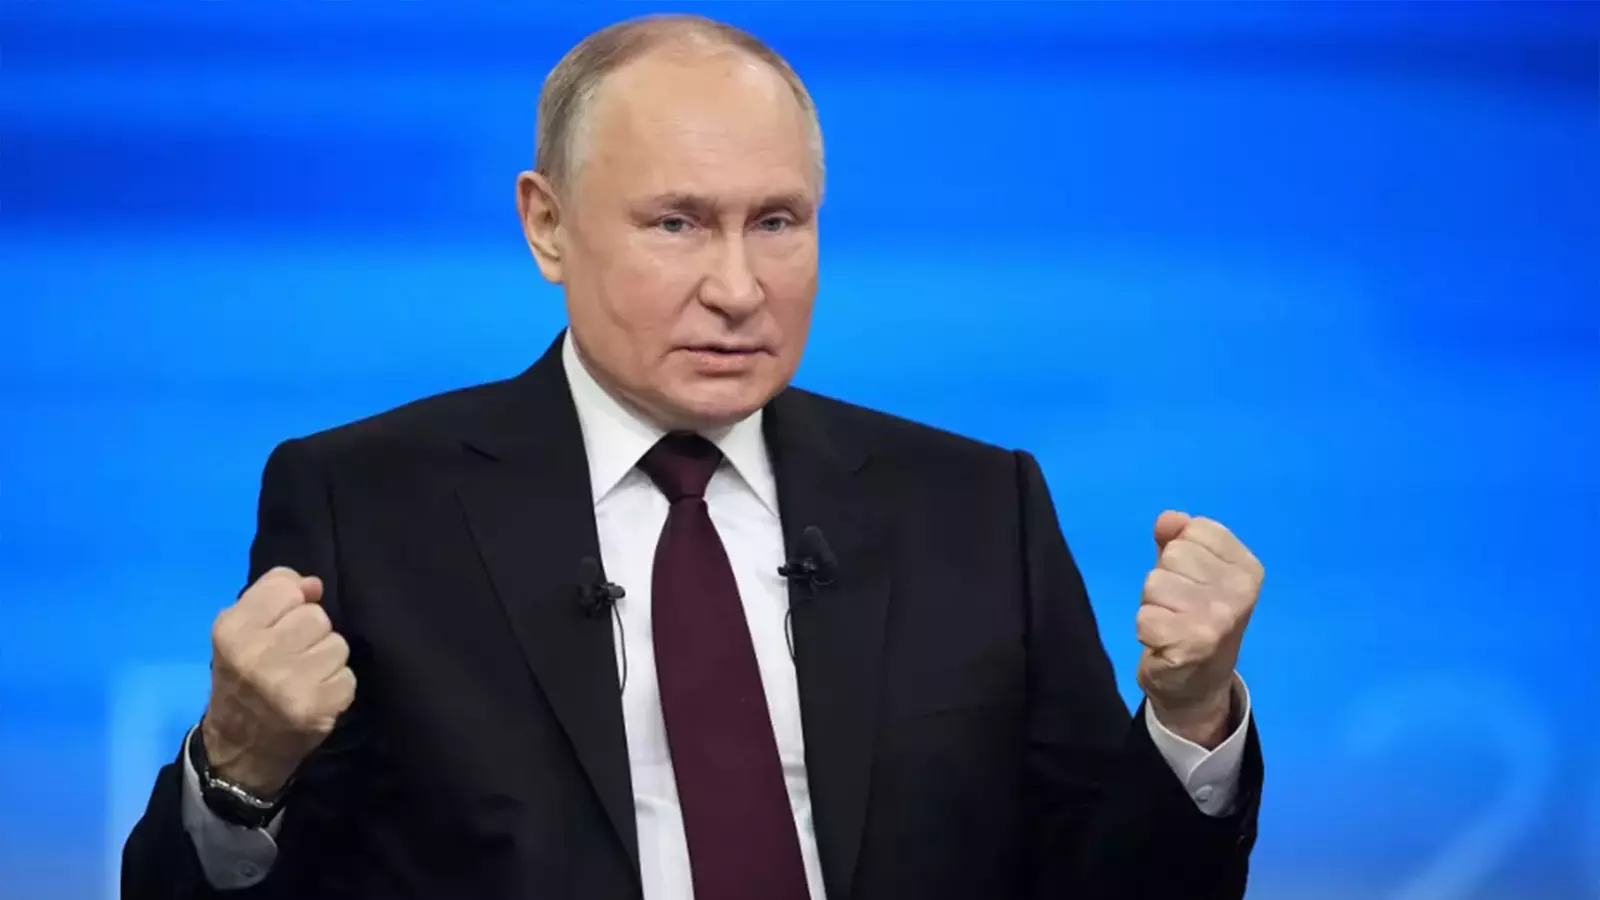 Vladimir Putin won the re-election to Russian Presidentship by a landslide, garnering 87.28% votes. As expected the response was mixed. 